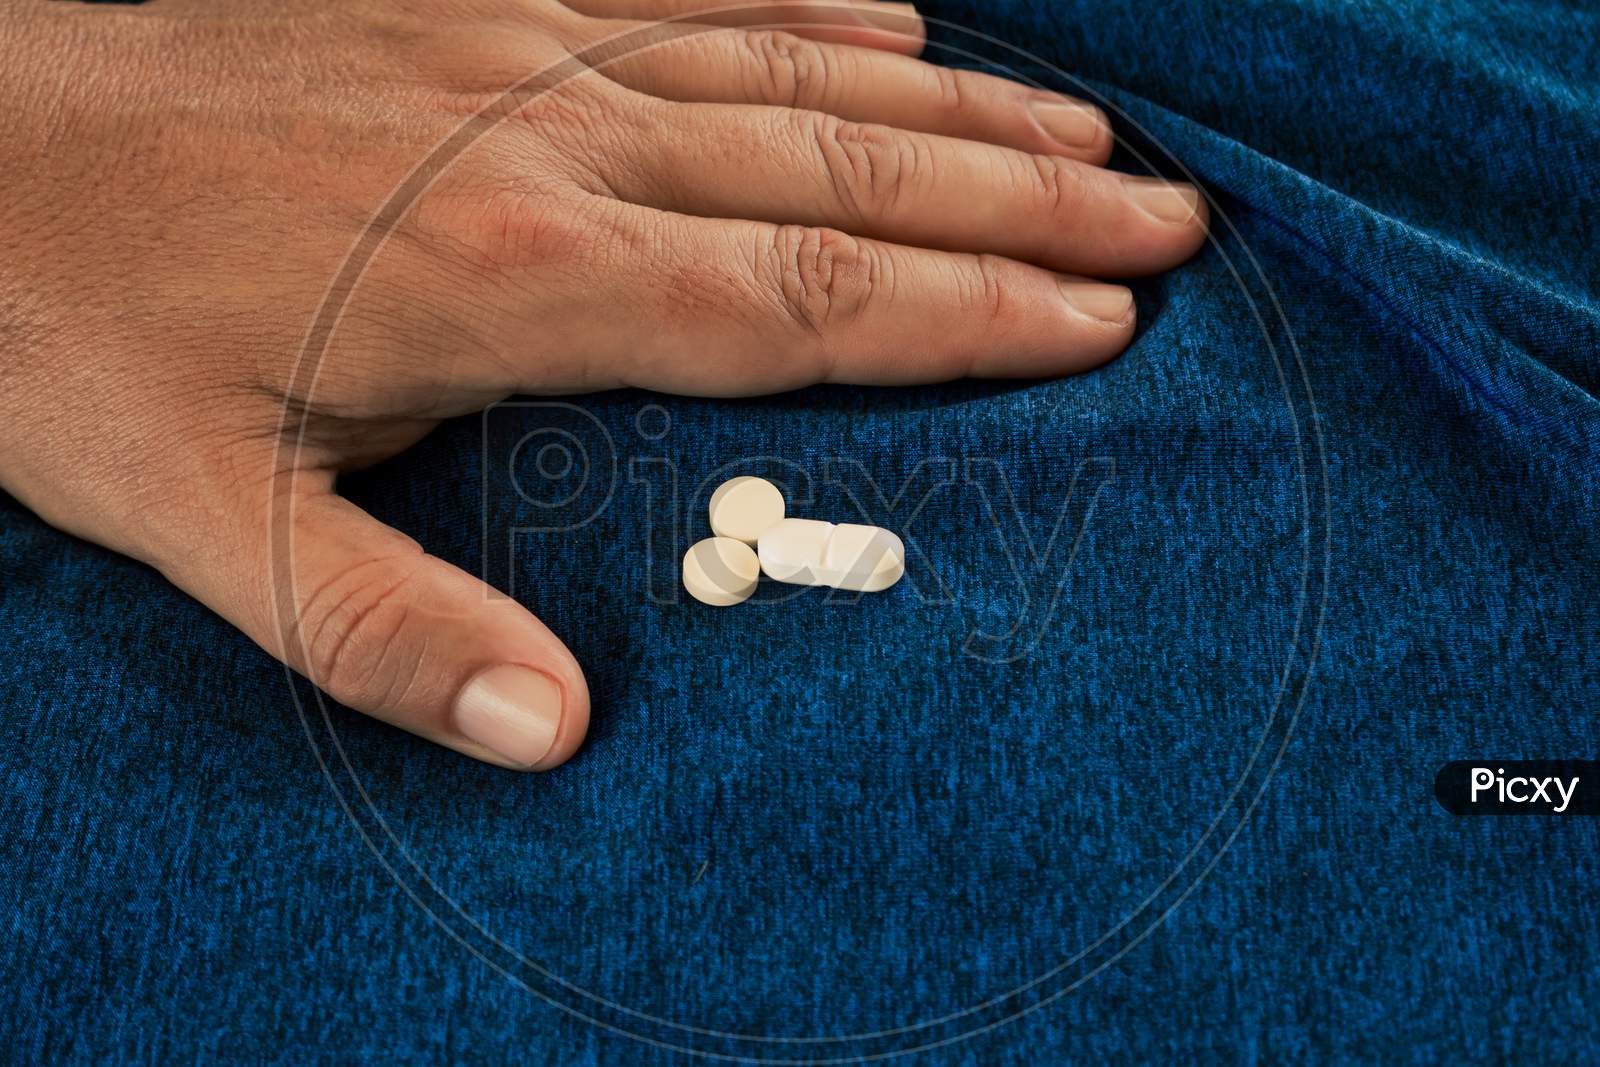 Pills On A Blue Textile Background Next To A Hand Of A Caucasian Man.